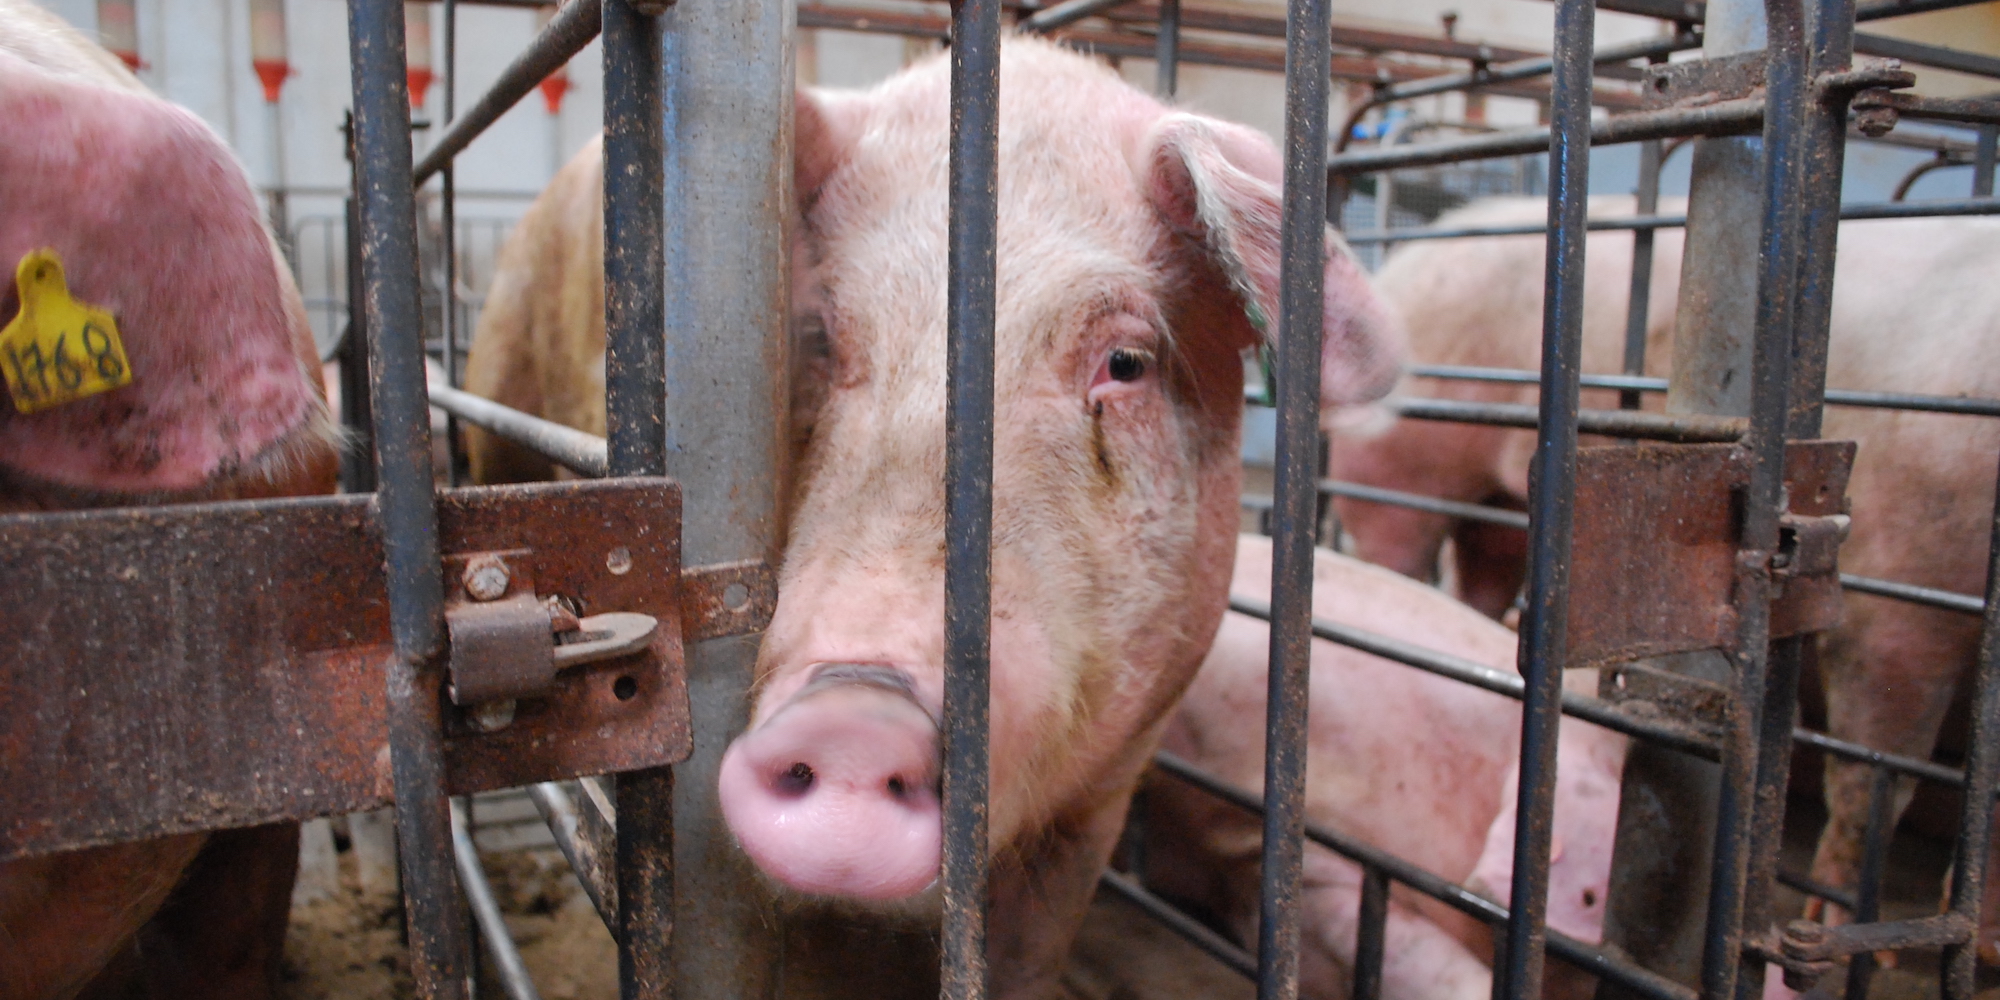 A sad looking pig with red eyes is pocking her nose through the bars of her cage in the farm